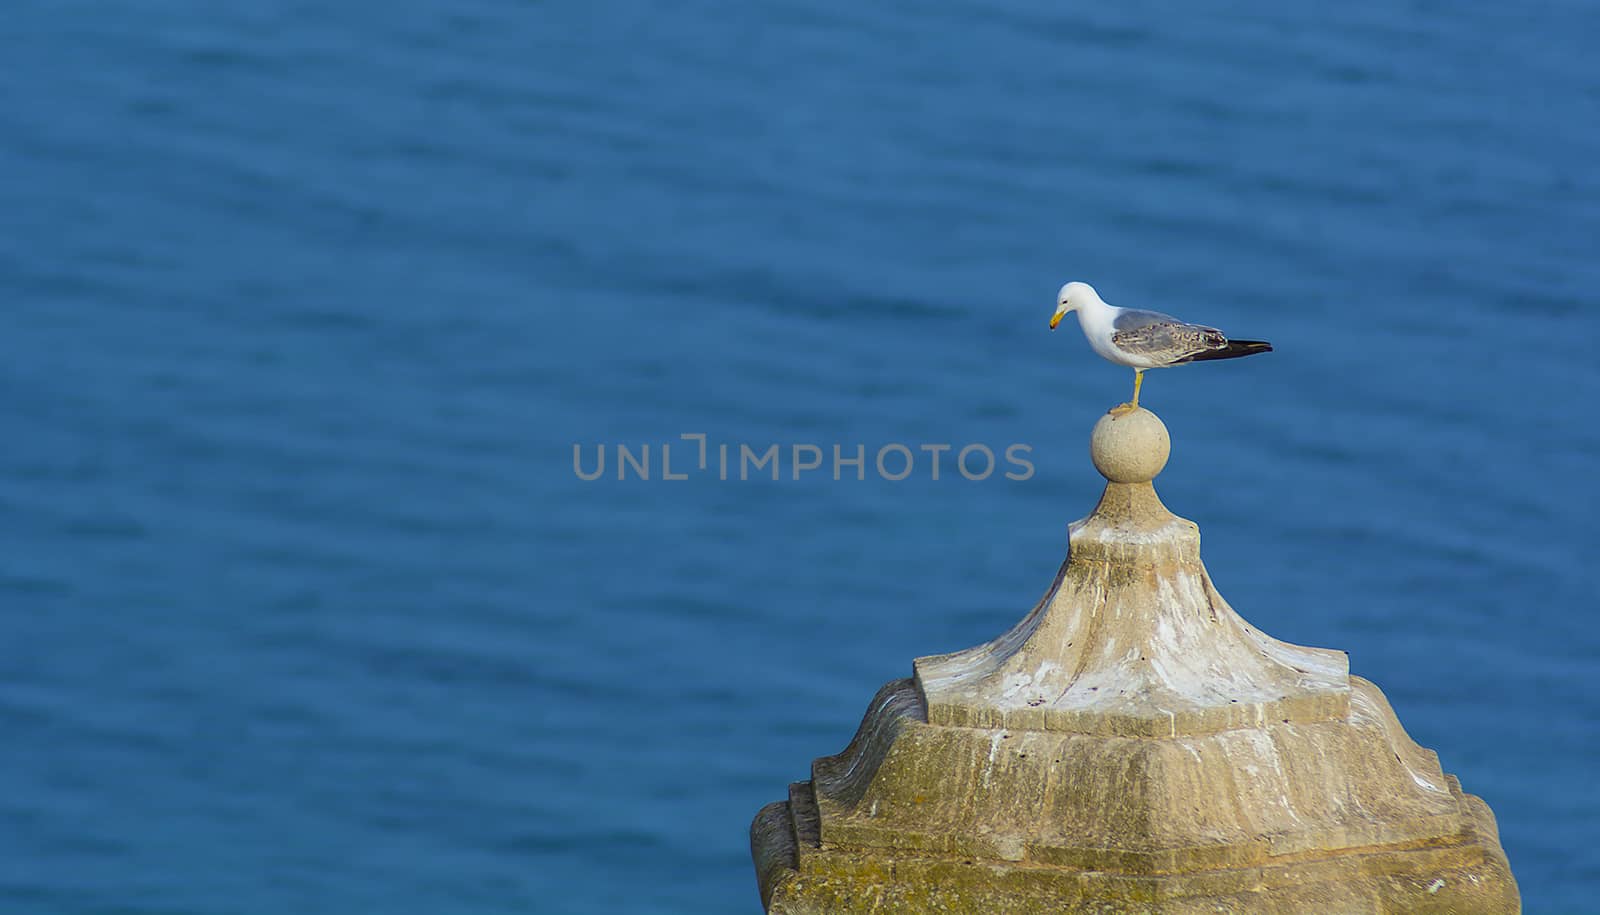 A lonely seagull standing on the top of a steeple